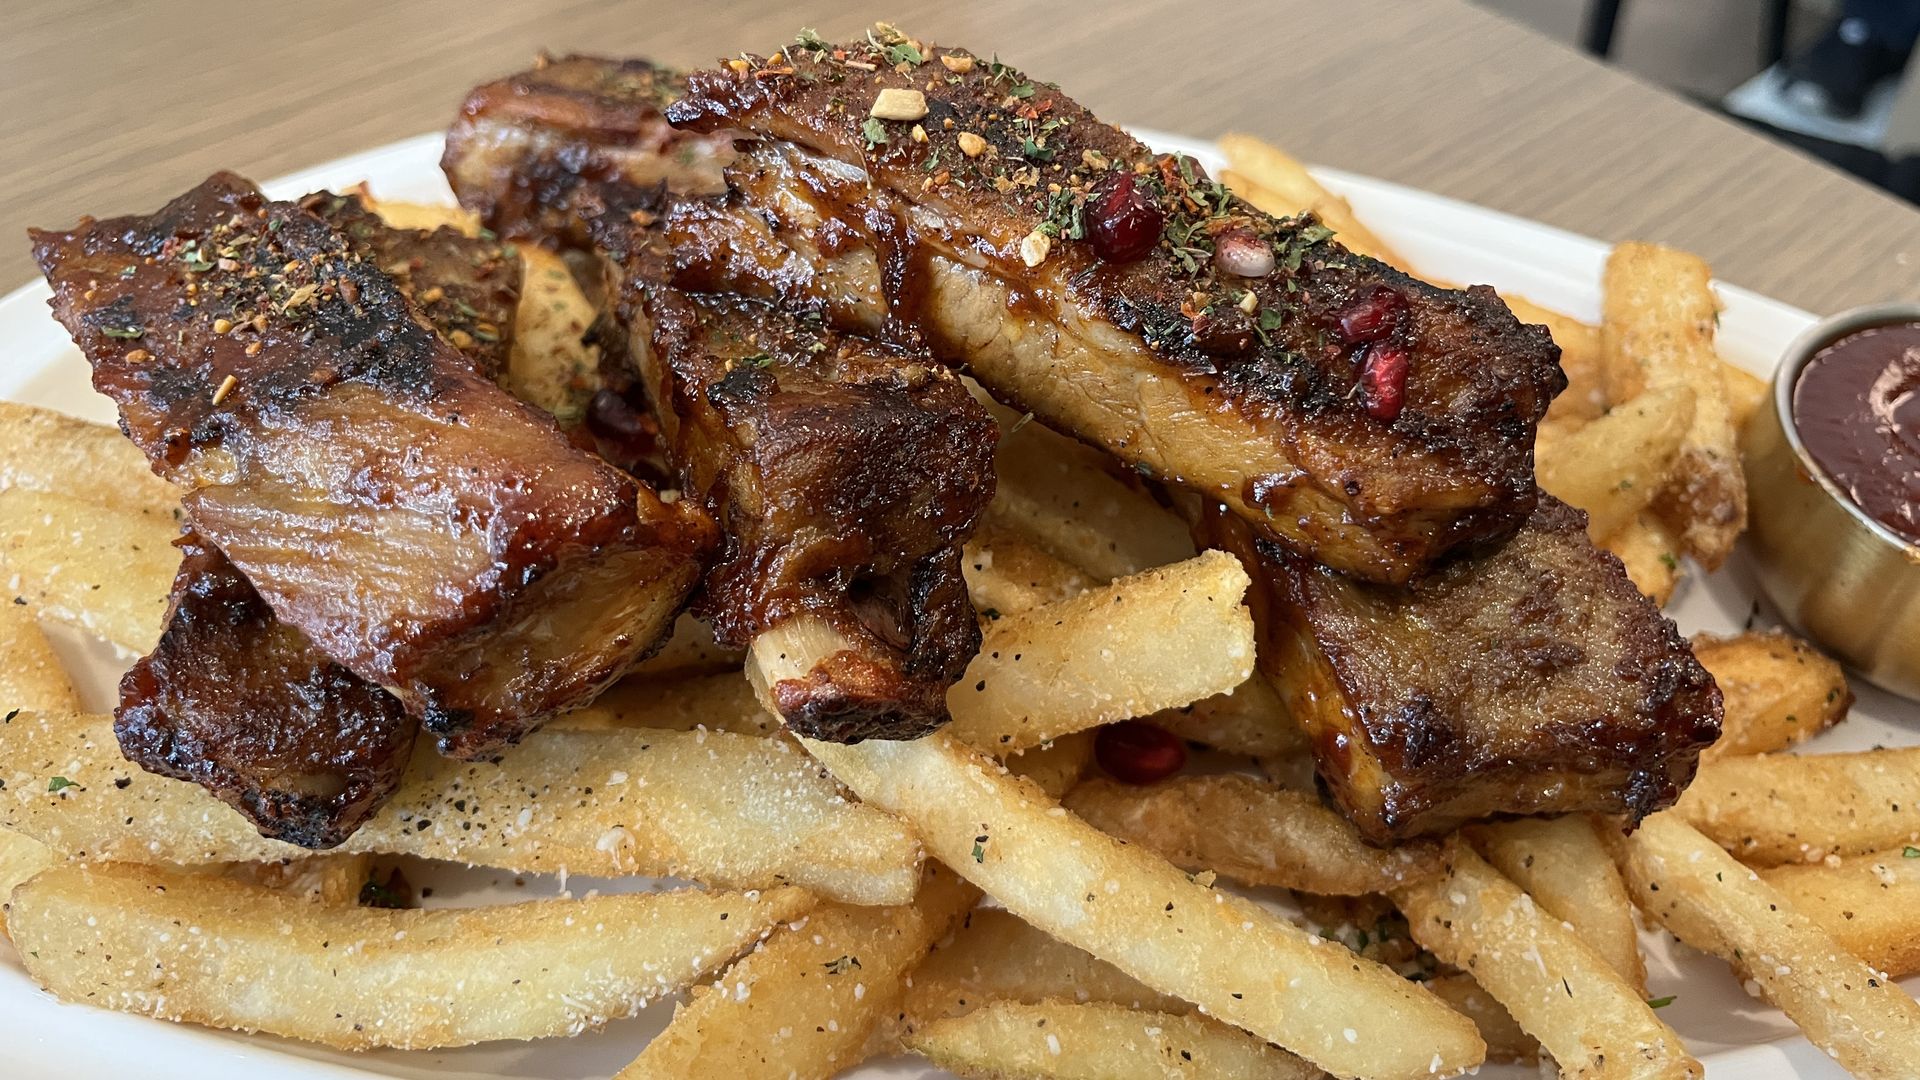 Five ribs stacked on top of a plate of french fries 